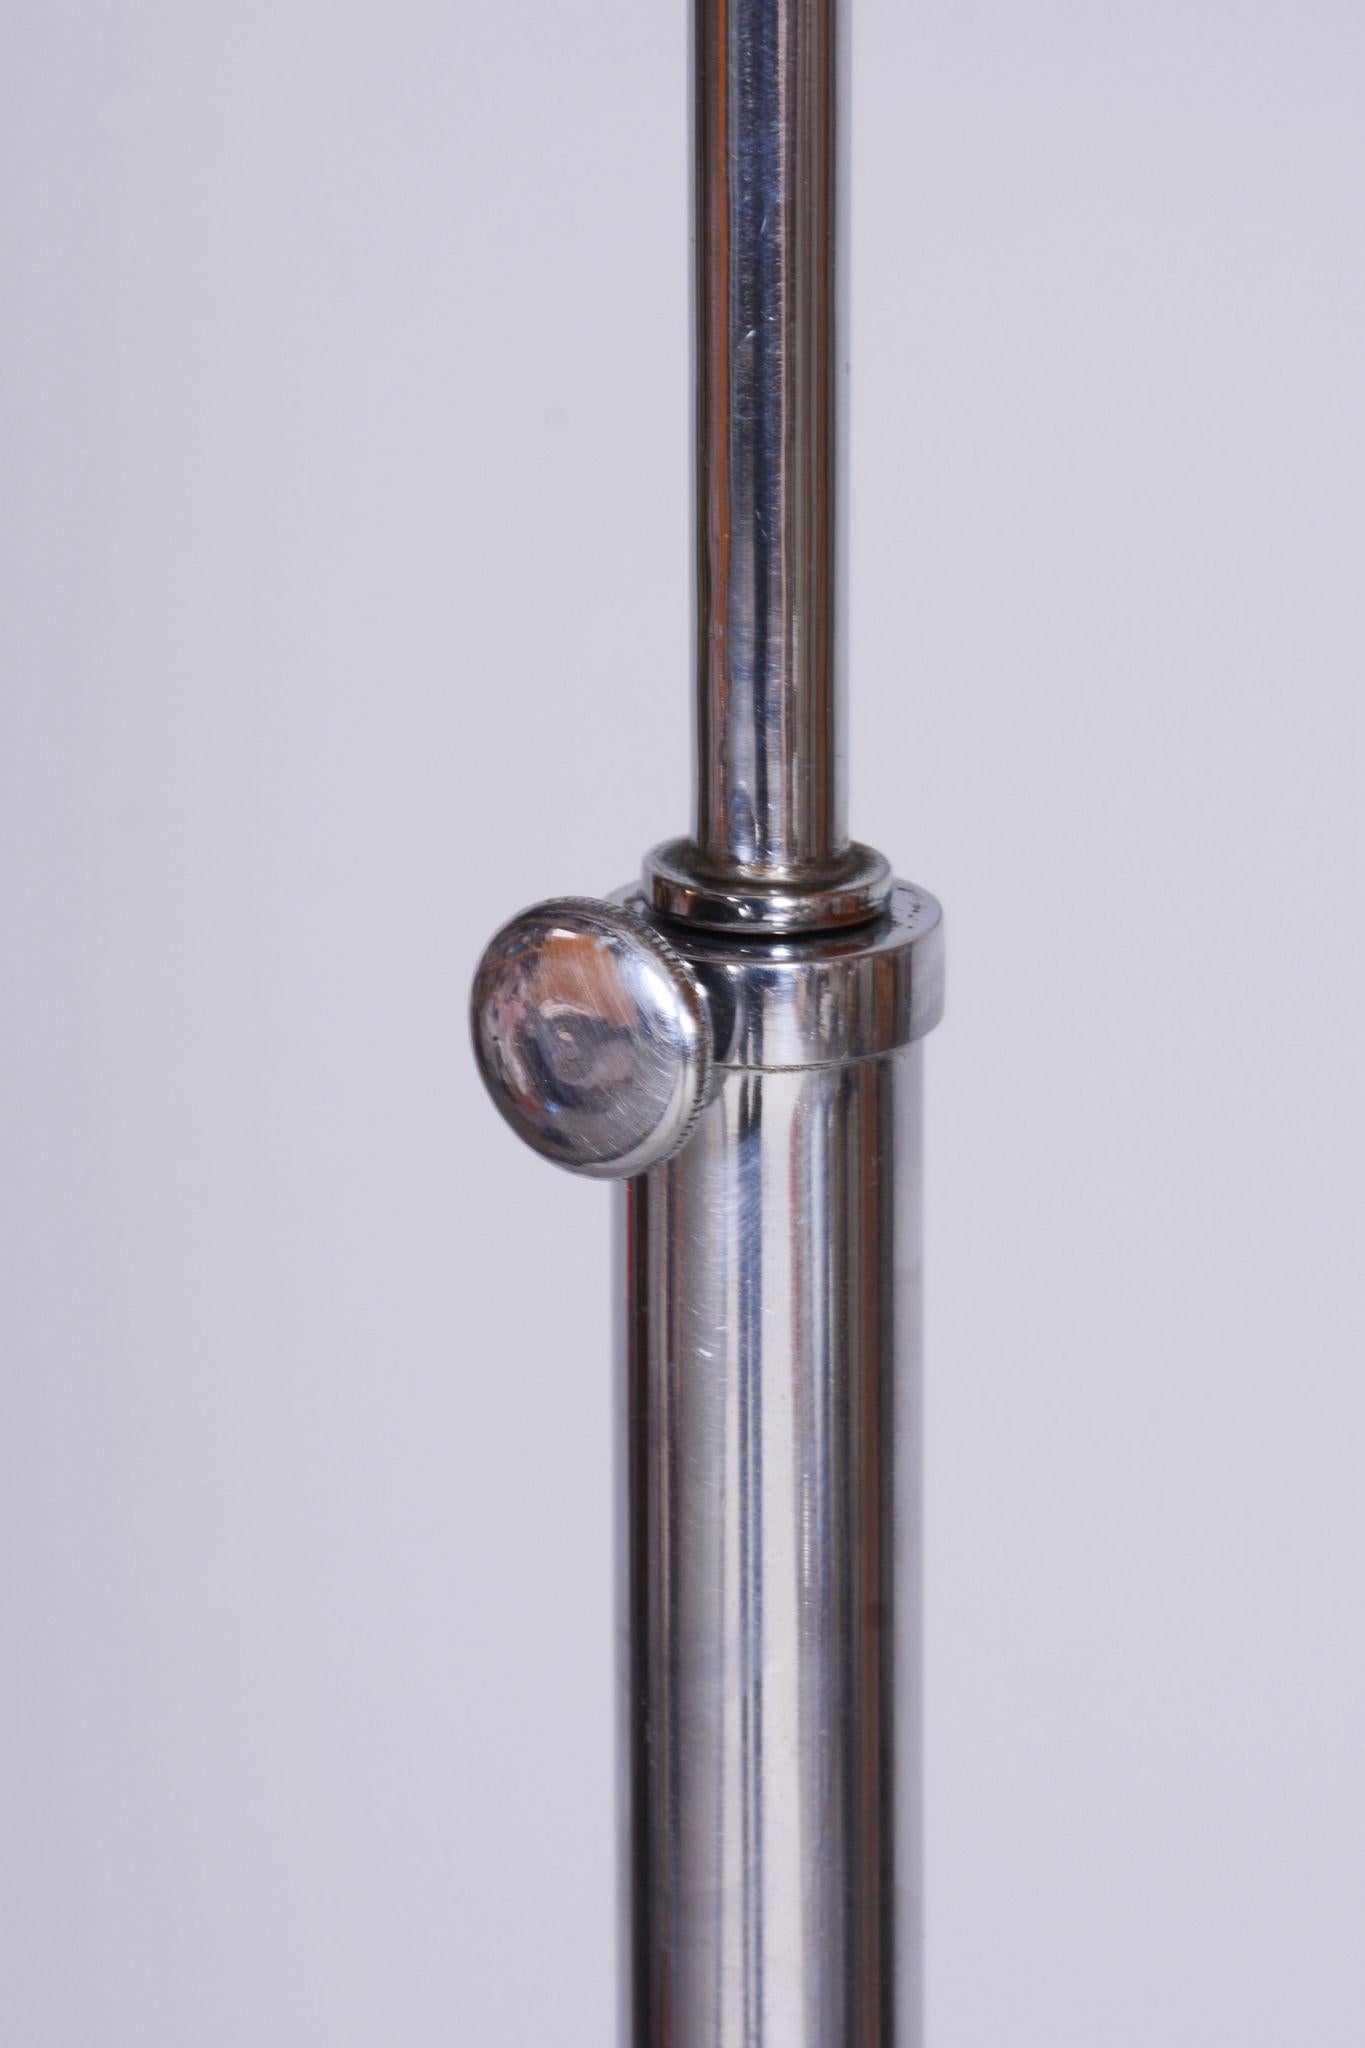 20th Century Czech Bauhaus Chrome Floor Lamp with Parchment Shade, 1920s For Sale 1